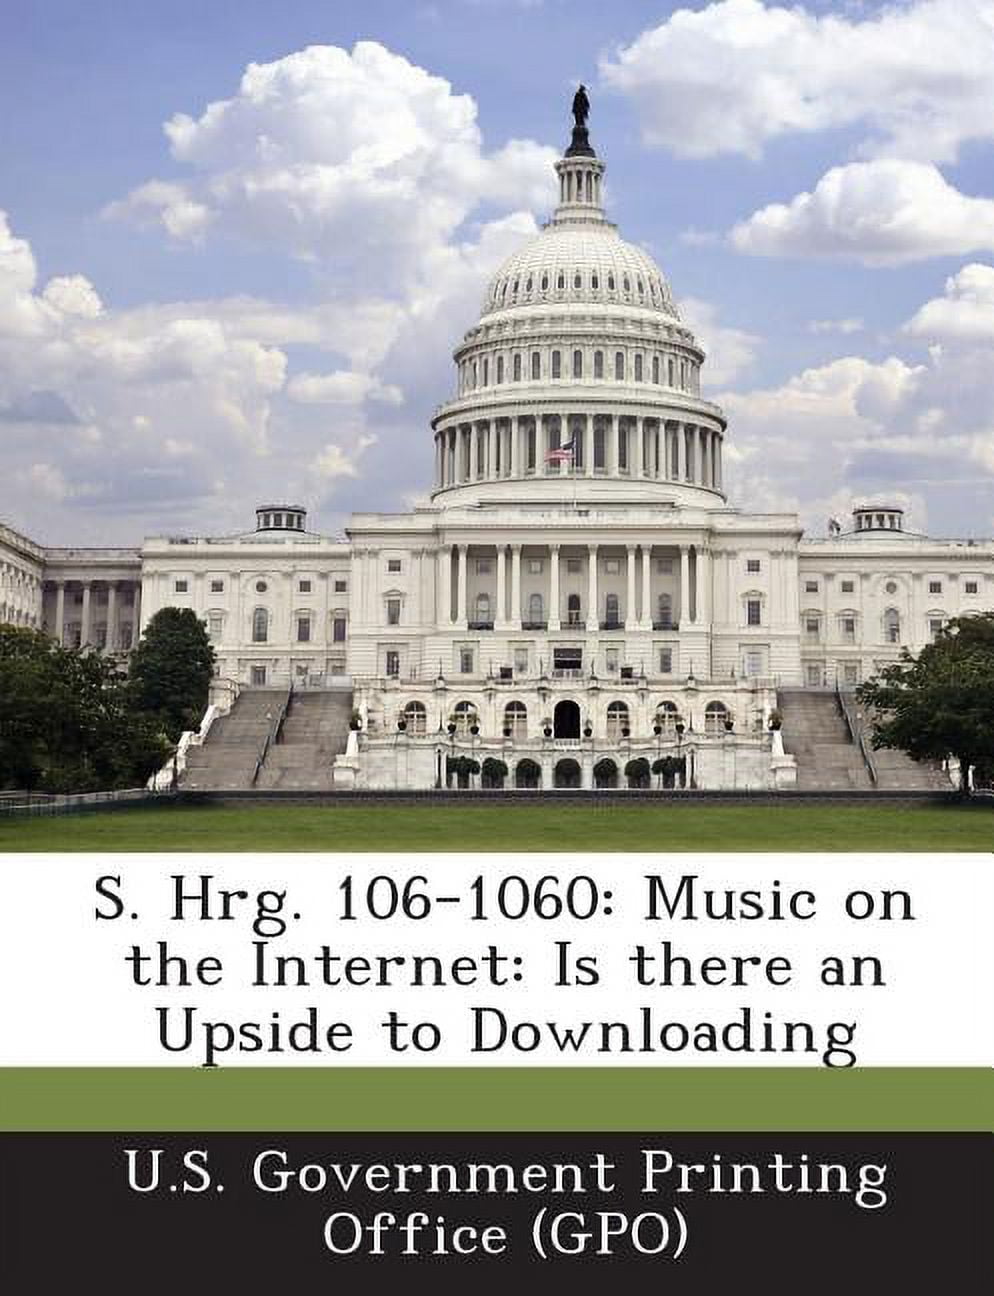 S. Hrg. 106-1060 : Music on the Internet: Is There an Upside to Downloading  